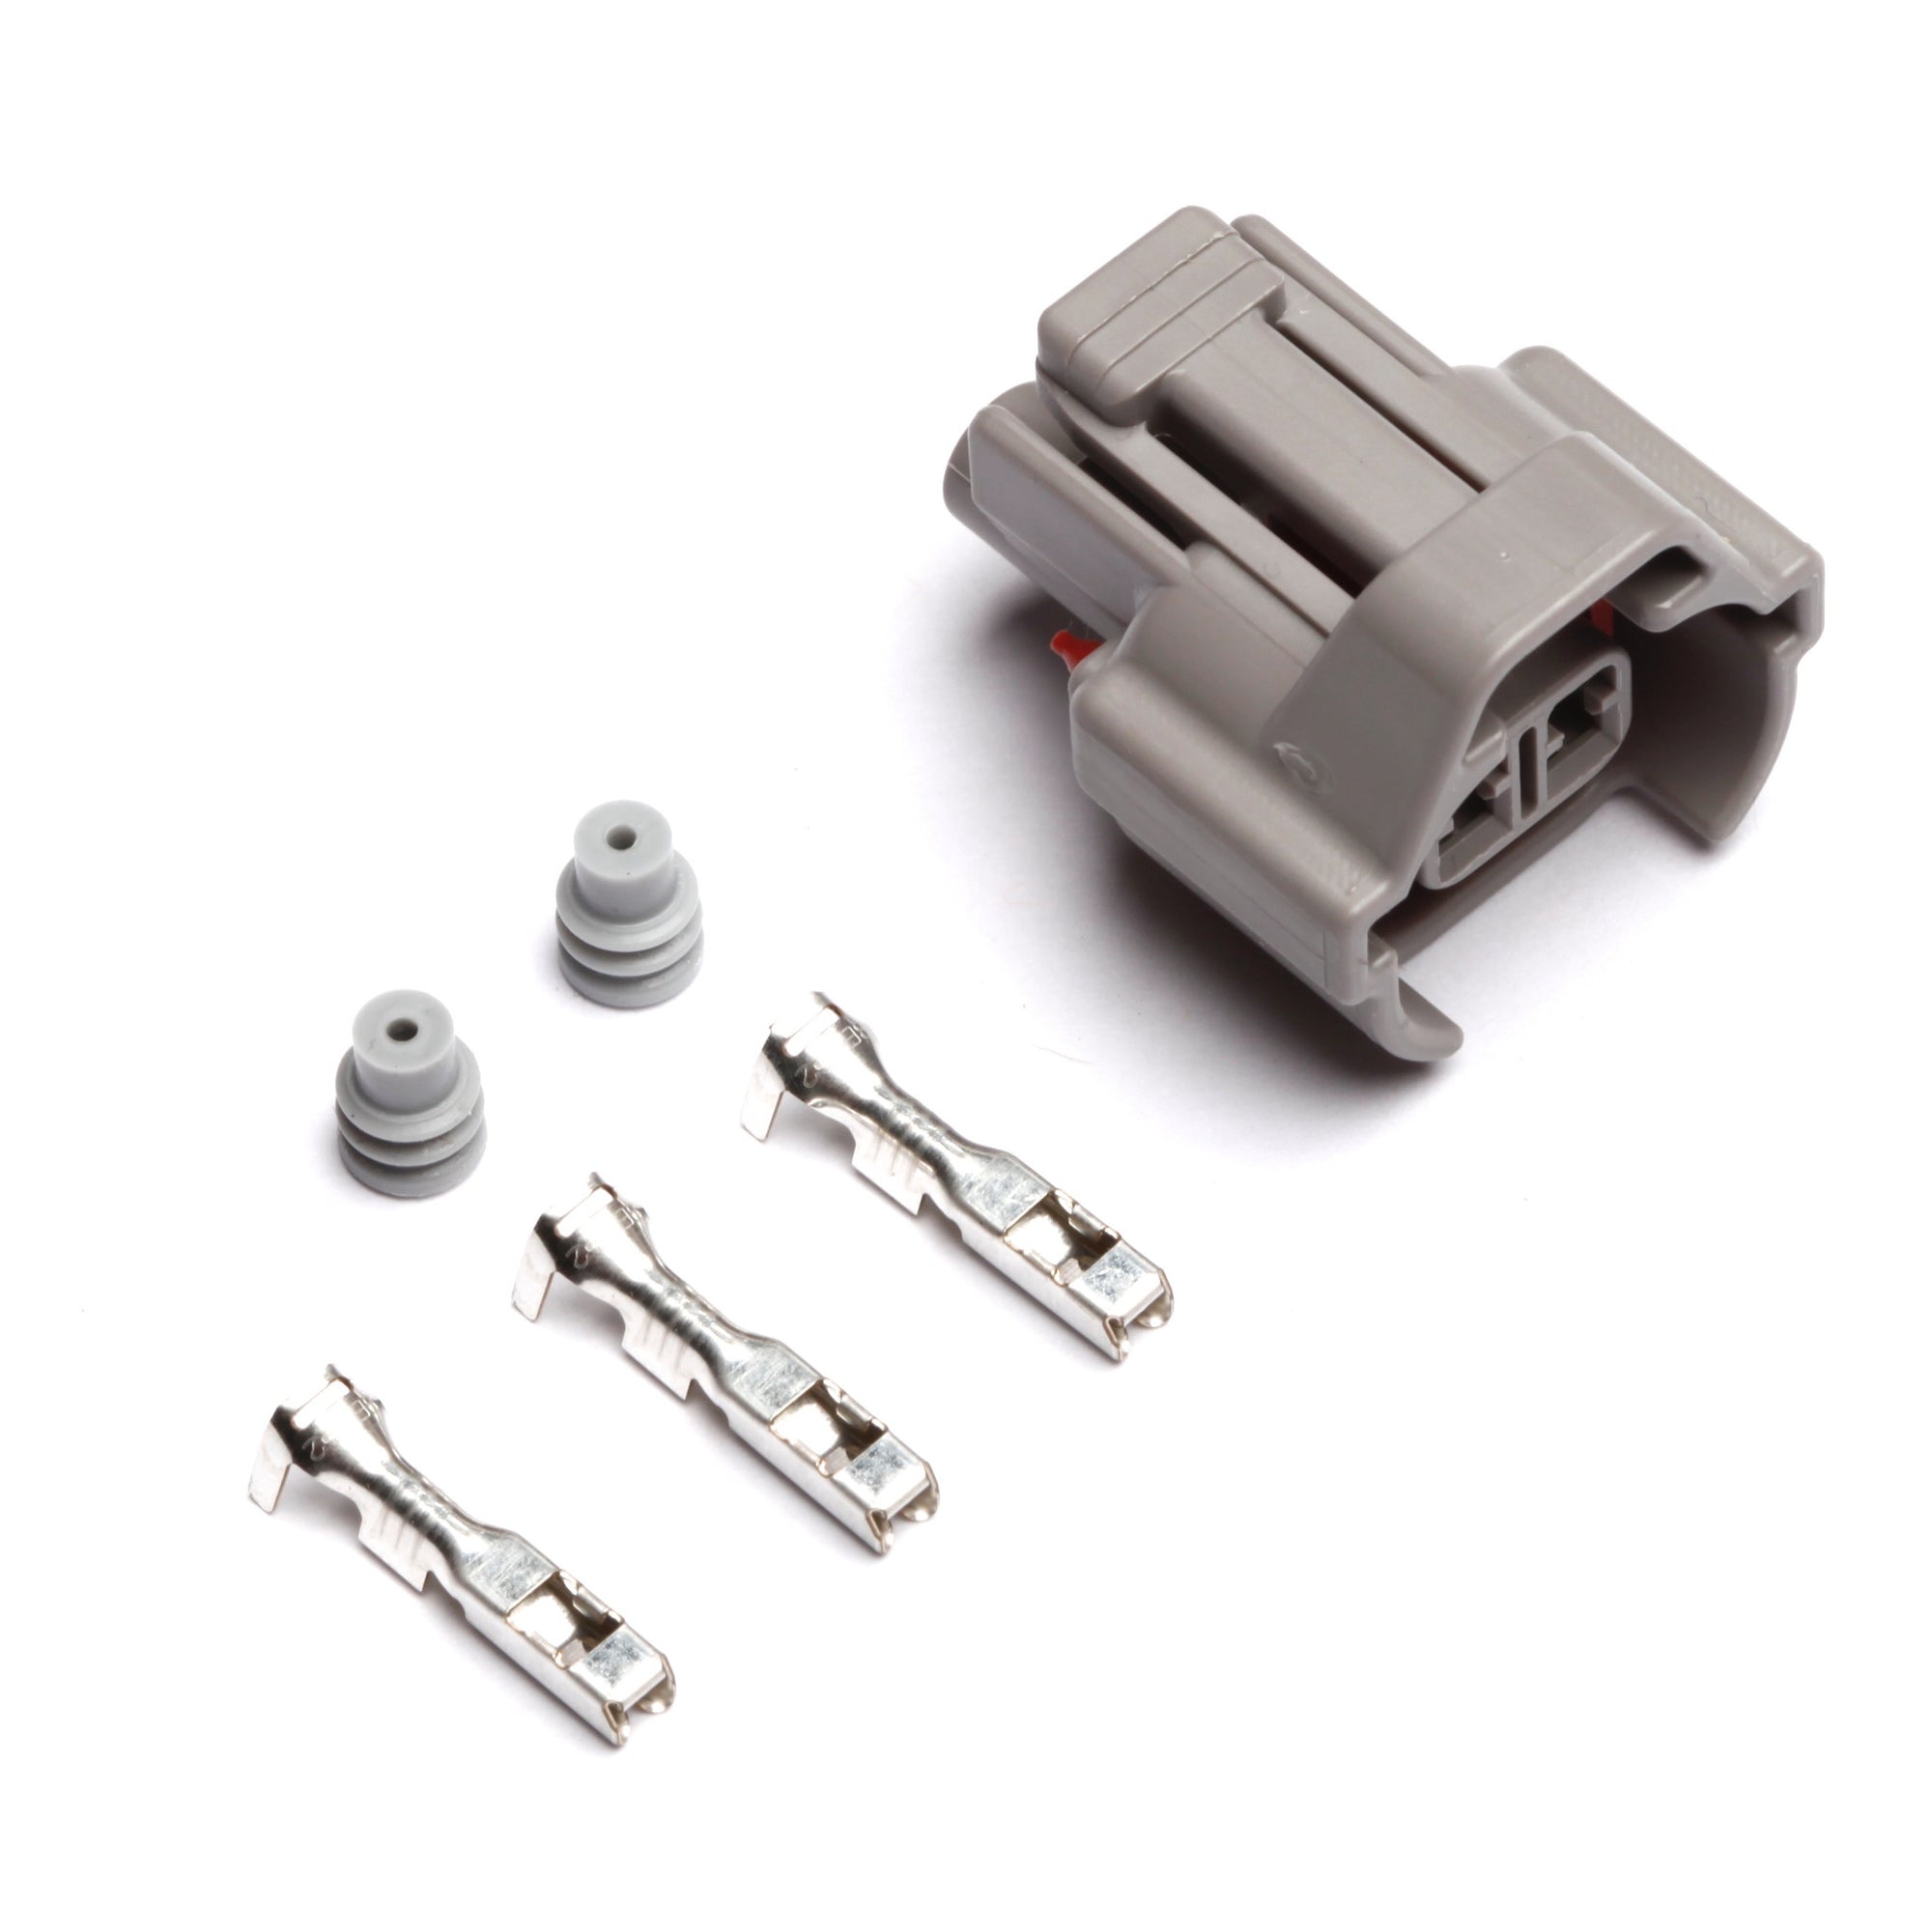 Connectors - Denso Injector Connector Kit